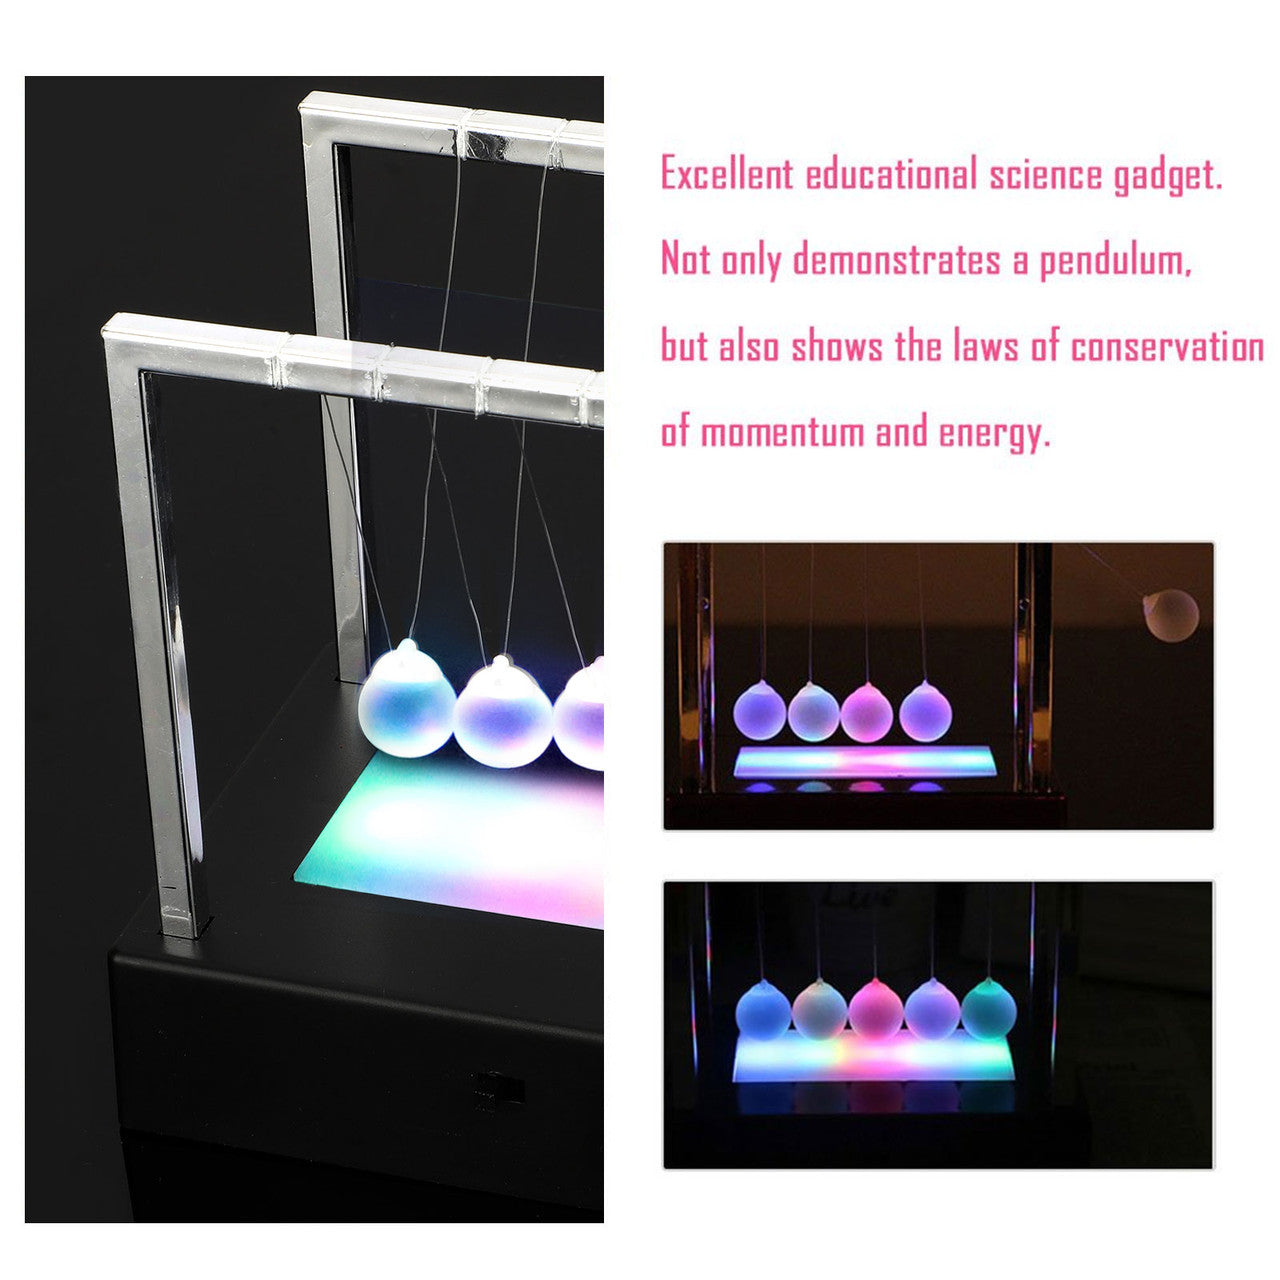 Toys for Desk, LED Light Up Newtons Cradle Metal Balls for Adults Stress Relief, Cool Fun Office Games Desktop Accessories - Calm Down Fidgets Kit Avoid Anxiety - Small Sensory Kids Toy Gifts for Kids